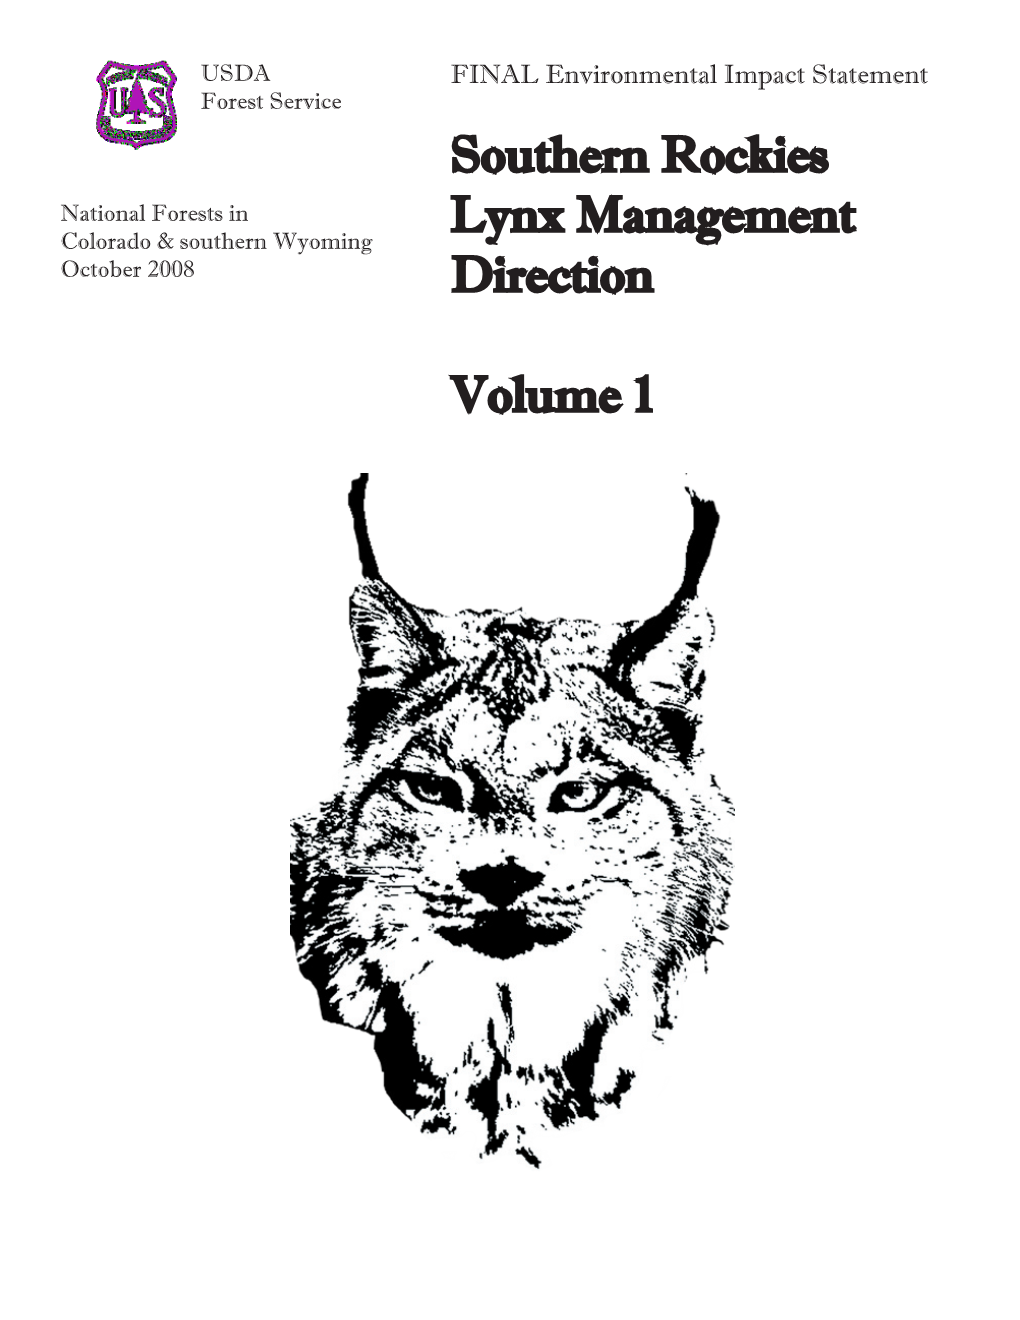 Southern Rockies Lynx Management Direction Volume 1